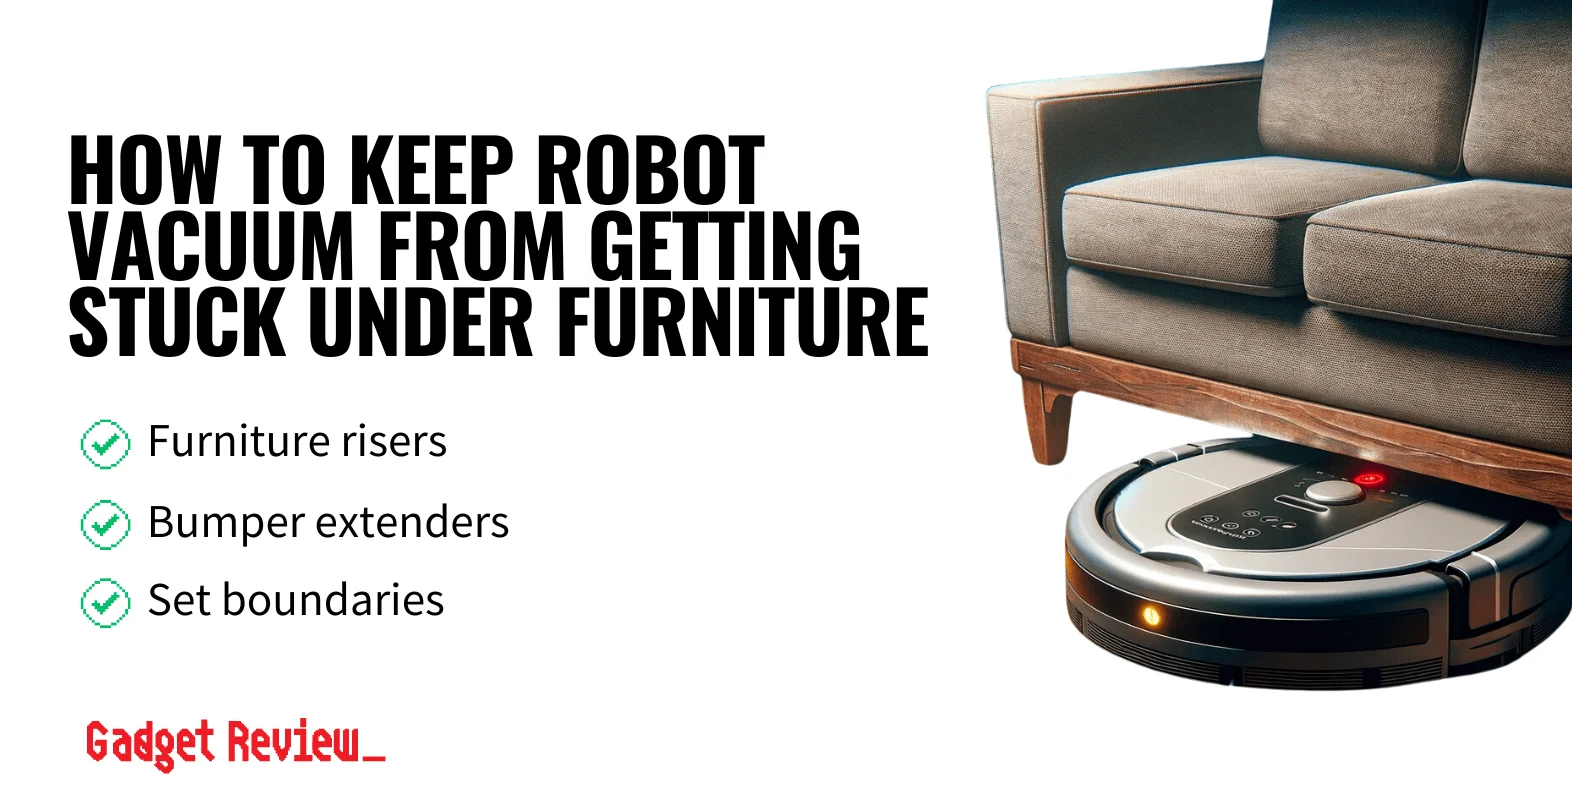 How to Keep a Robot Vacuum From Getting Stuck Under Furniture